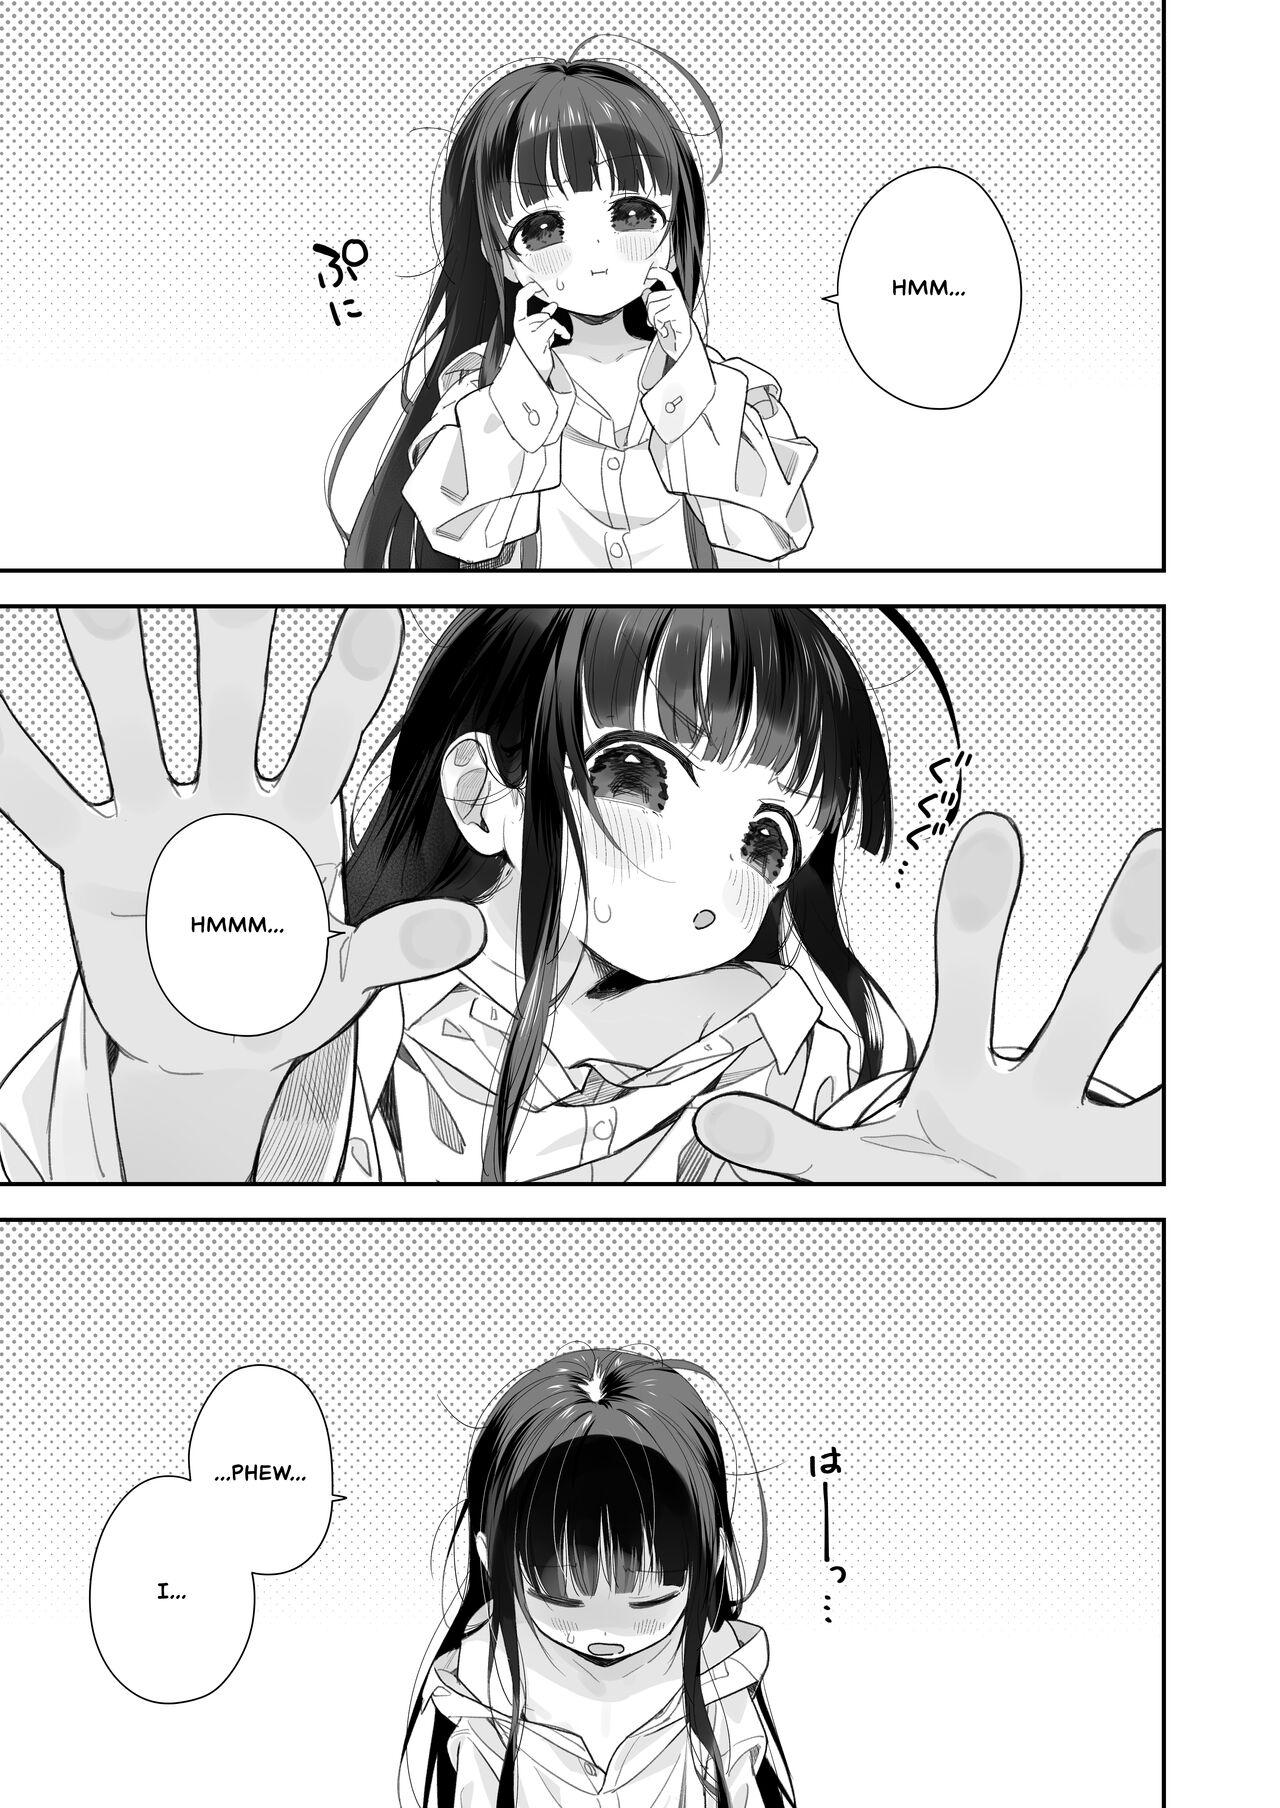 Lima [Asunaro Neat. (Ronna)] TS Loli Oji-san no Bouken Onanie Hen | The Adventures of an Old Man Who Was Gender-Swapped Into a Loli ~Masturbation Chapter~ [English] [CulturedCommissions] [Digital] - Original Black Gay - Page 2